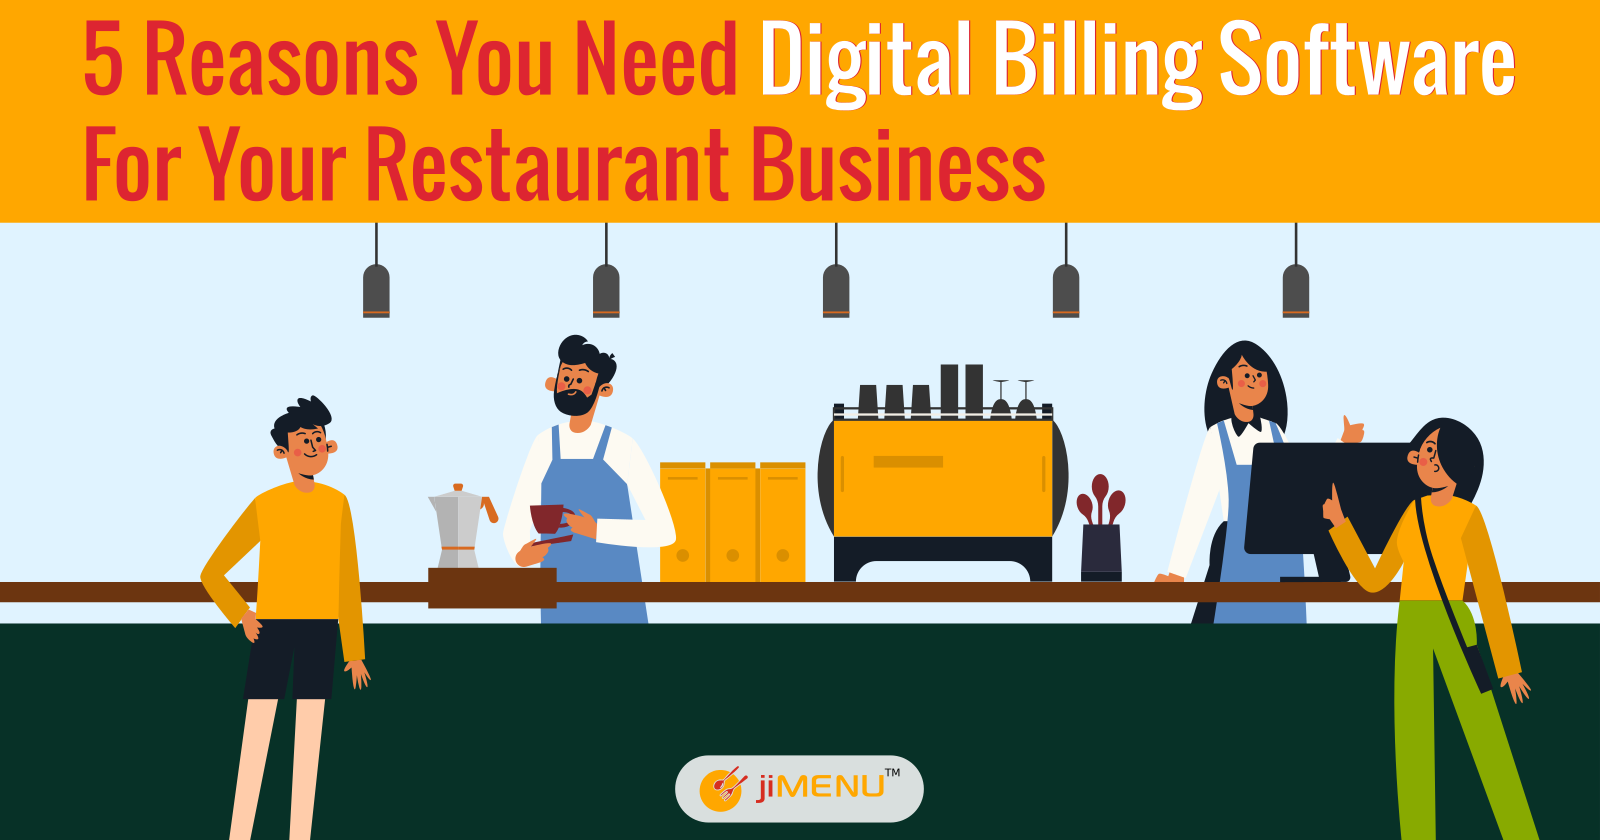 5 Reasons You Need Digital Billing Software For Your Restaurant Business